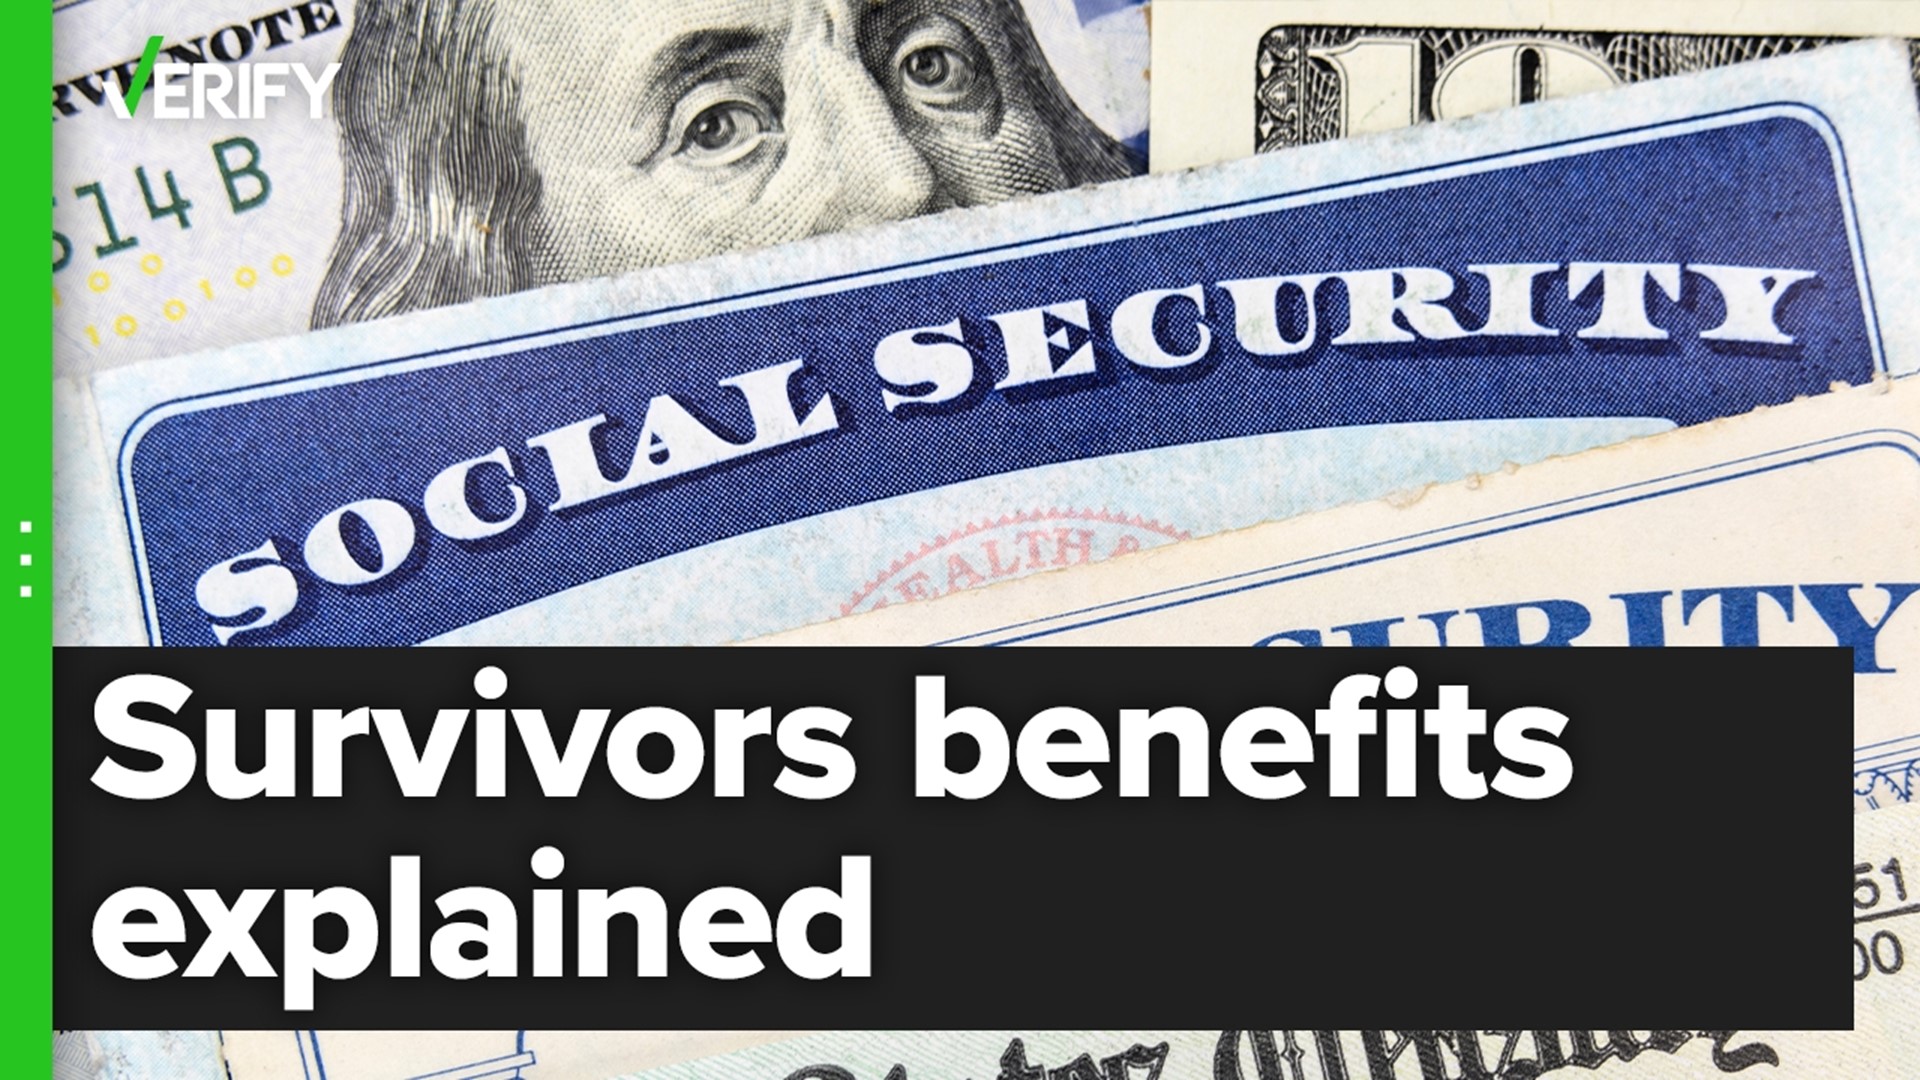 Spouses and other family members are eligible for Social Security survivors benefits after a person dies. Here’s how the monthly payments work.